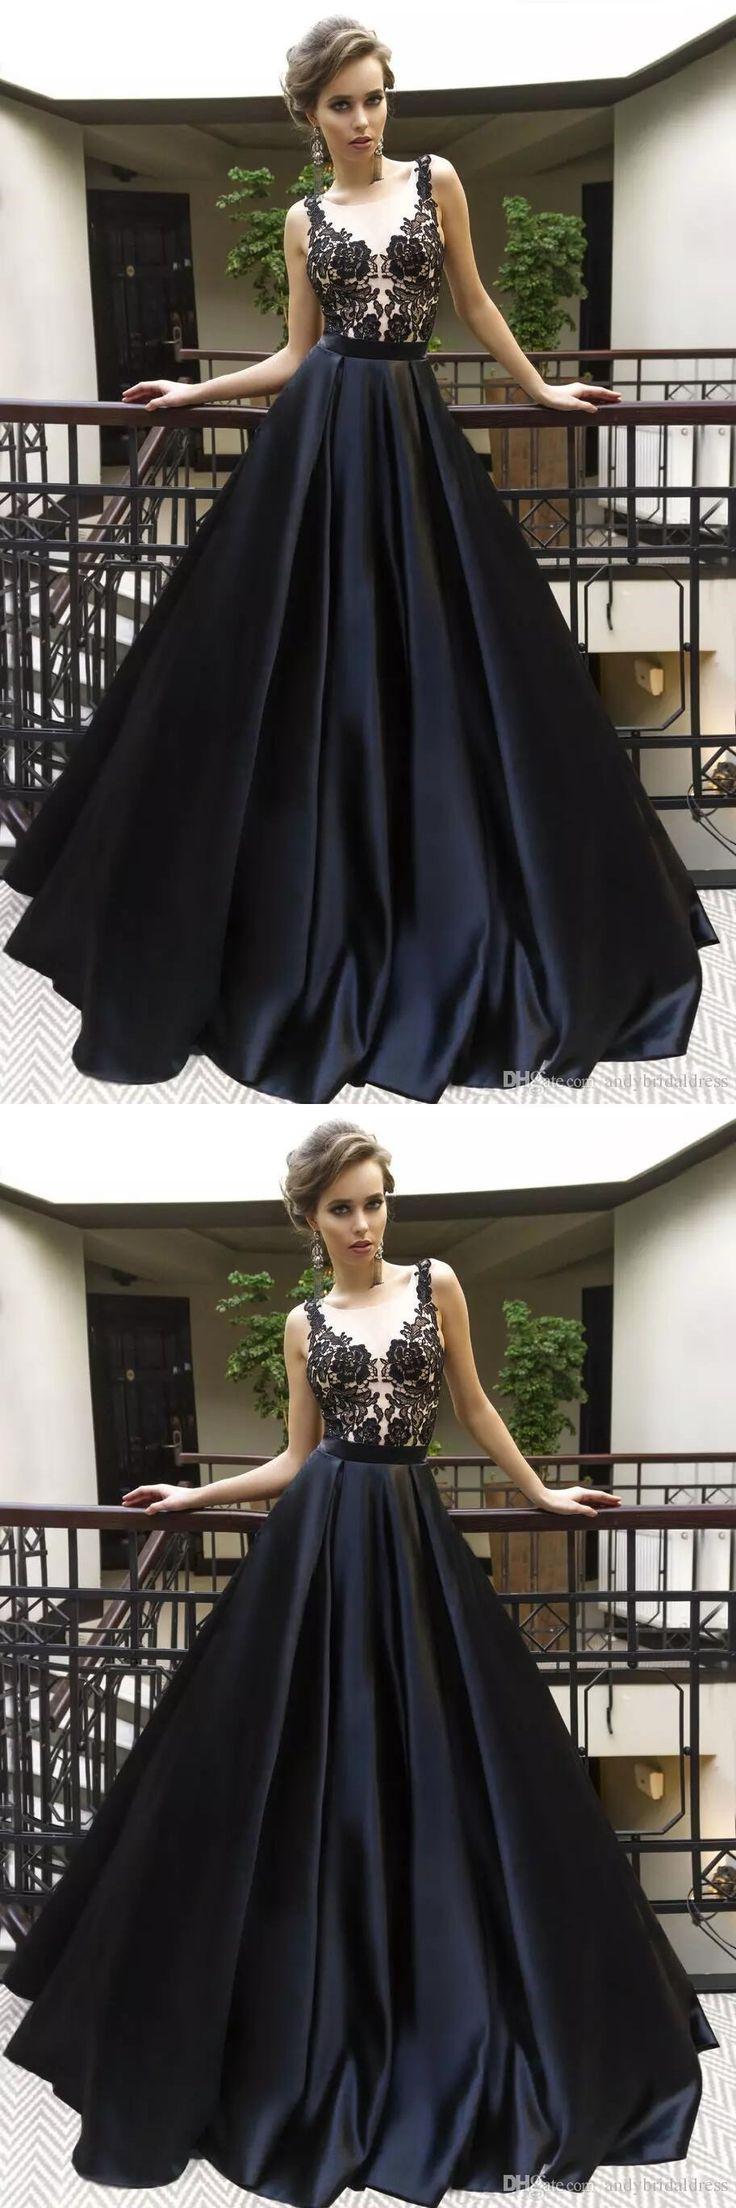 Свадьба - Black Prom Dress 2018,Prom Dresses,Evening Gown, Graduation Party Dresses, Prom Dresses For Teens G361 From MeetBeauty